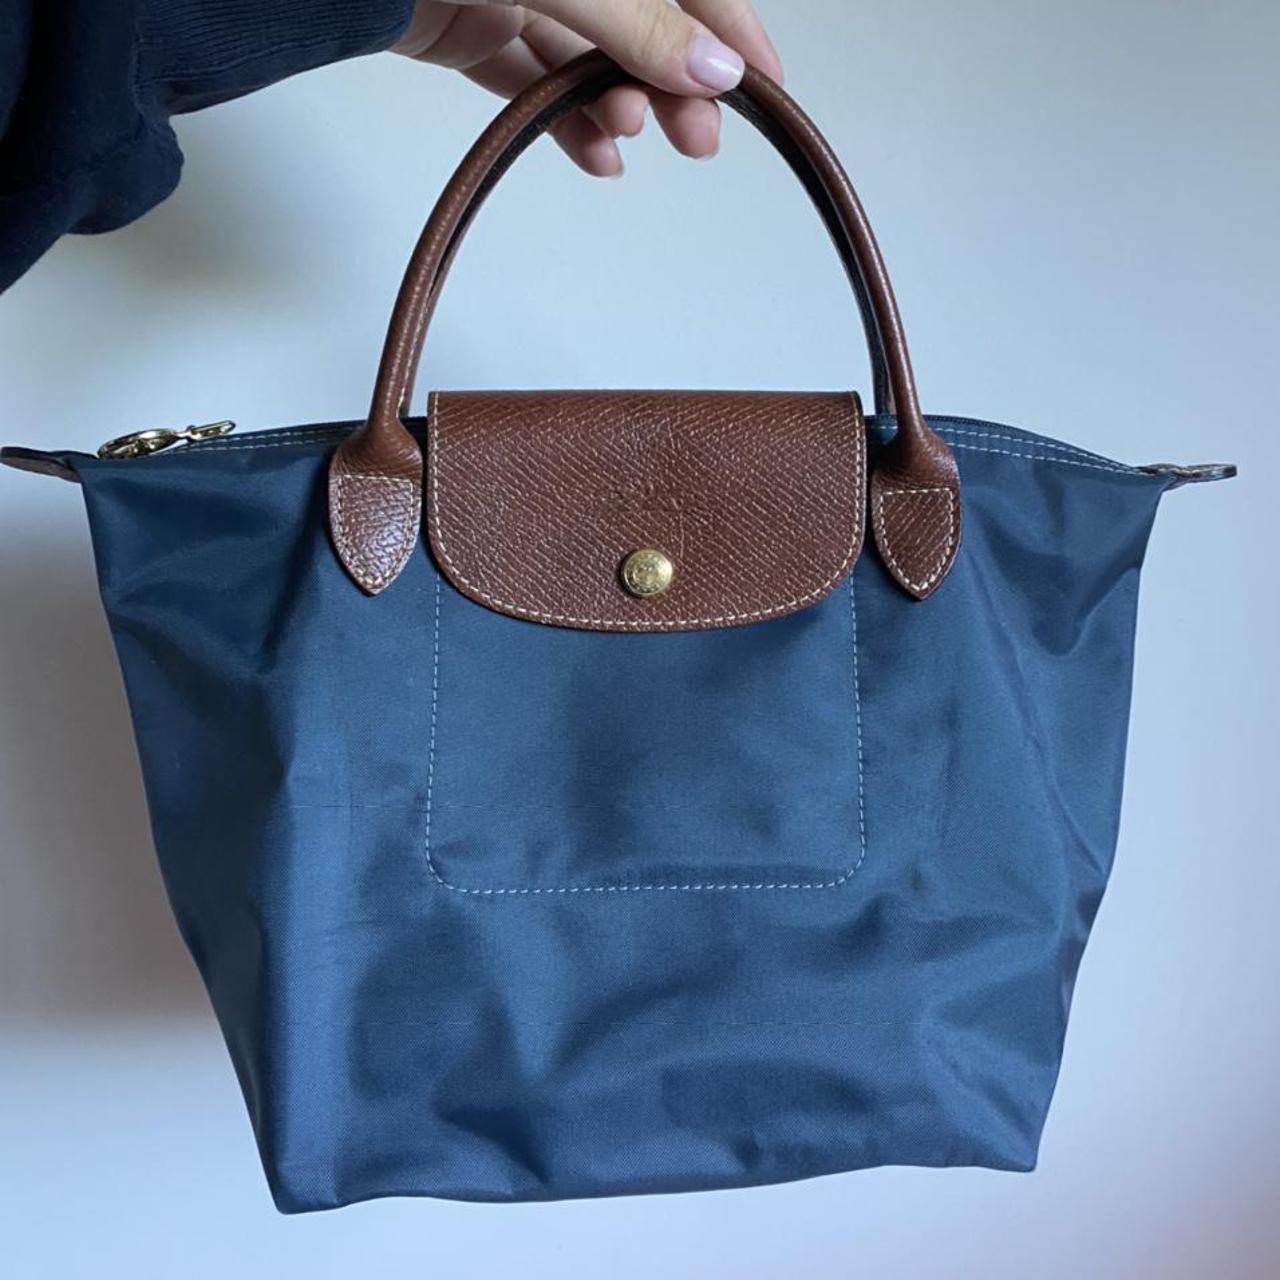 Stunning Longchamp Le Pliage top handle bag in the... - Depop